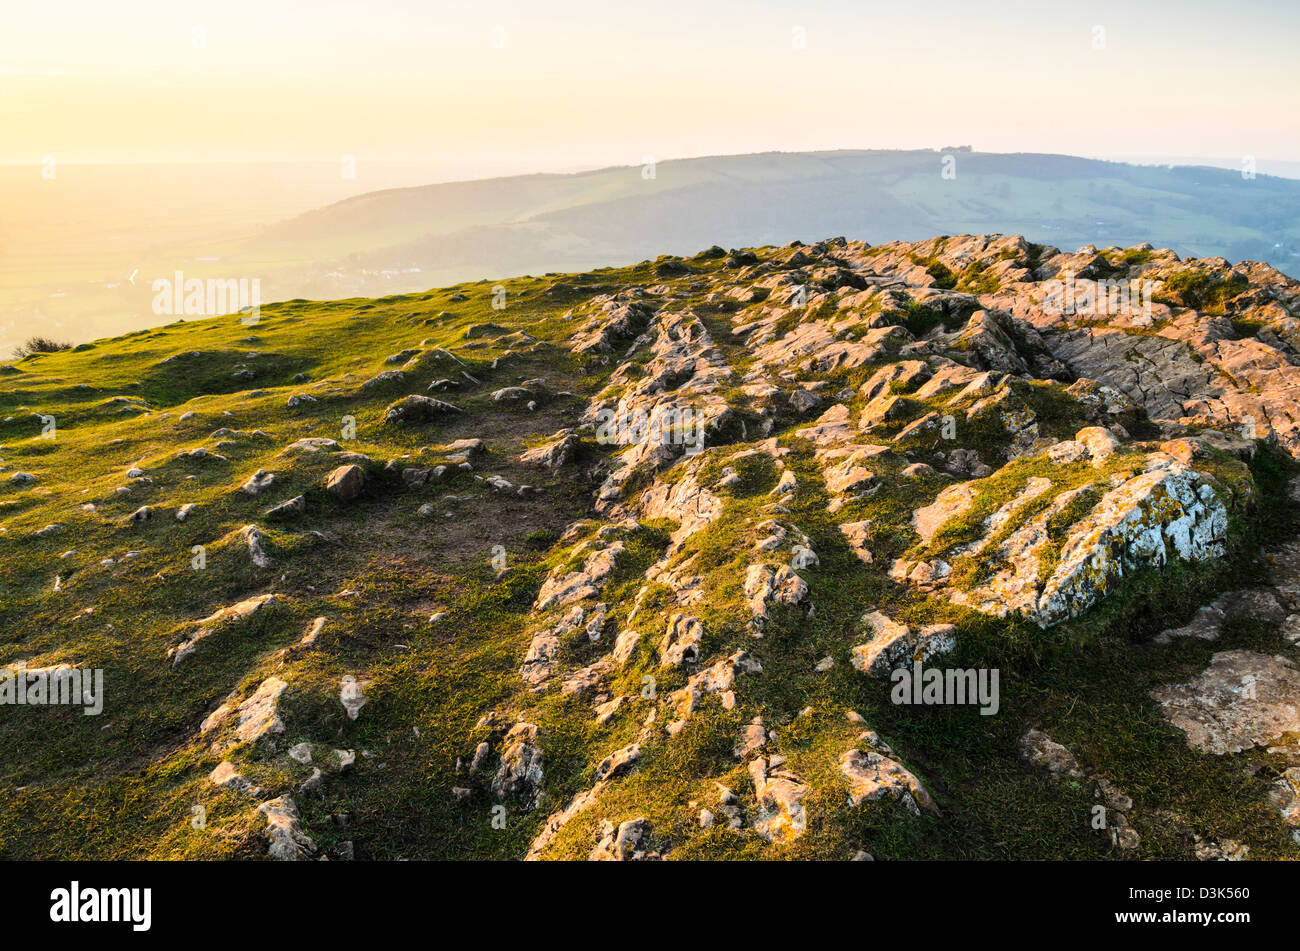 Limestone outcrop at Crook Peak in the Mendip Hills with Bleadon Hill in the distance. Axbridge, Somerset, England. Stock Photo